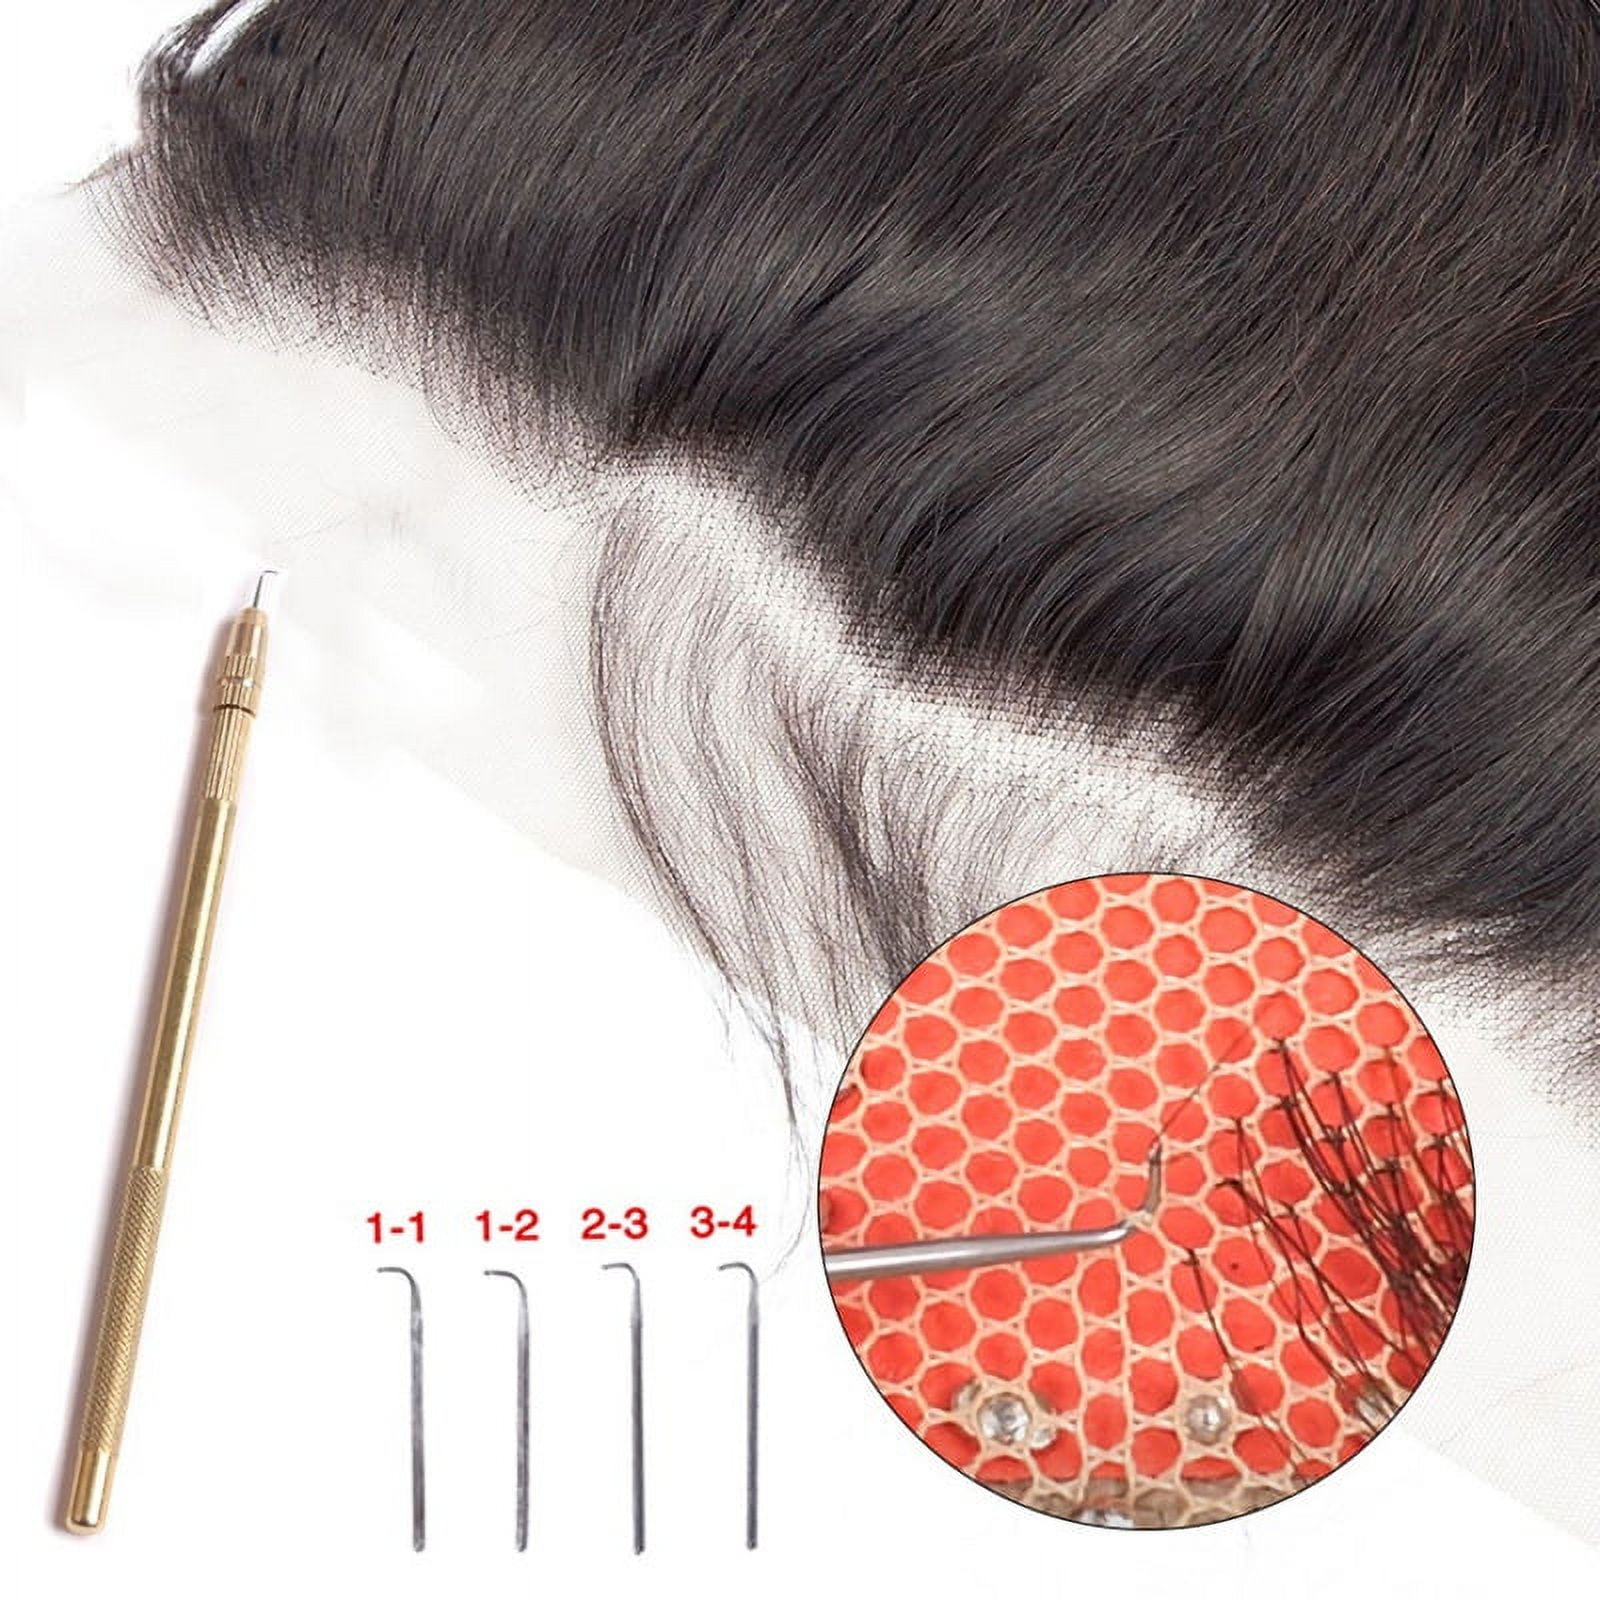 Professional 825 Meters Wigs Weaving Cotton Thread For Wig Making Blocking  Knitting Modeling And Crafts Hair Weave Thread - Hook Needle - AliExpress